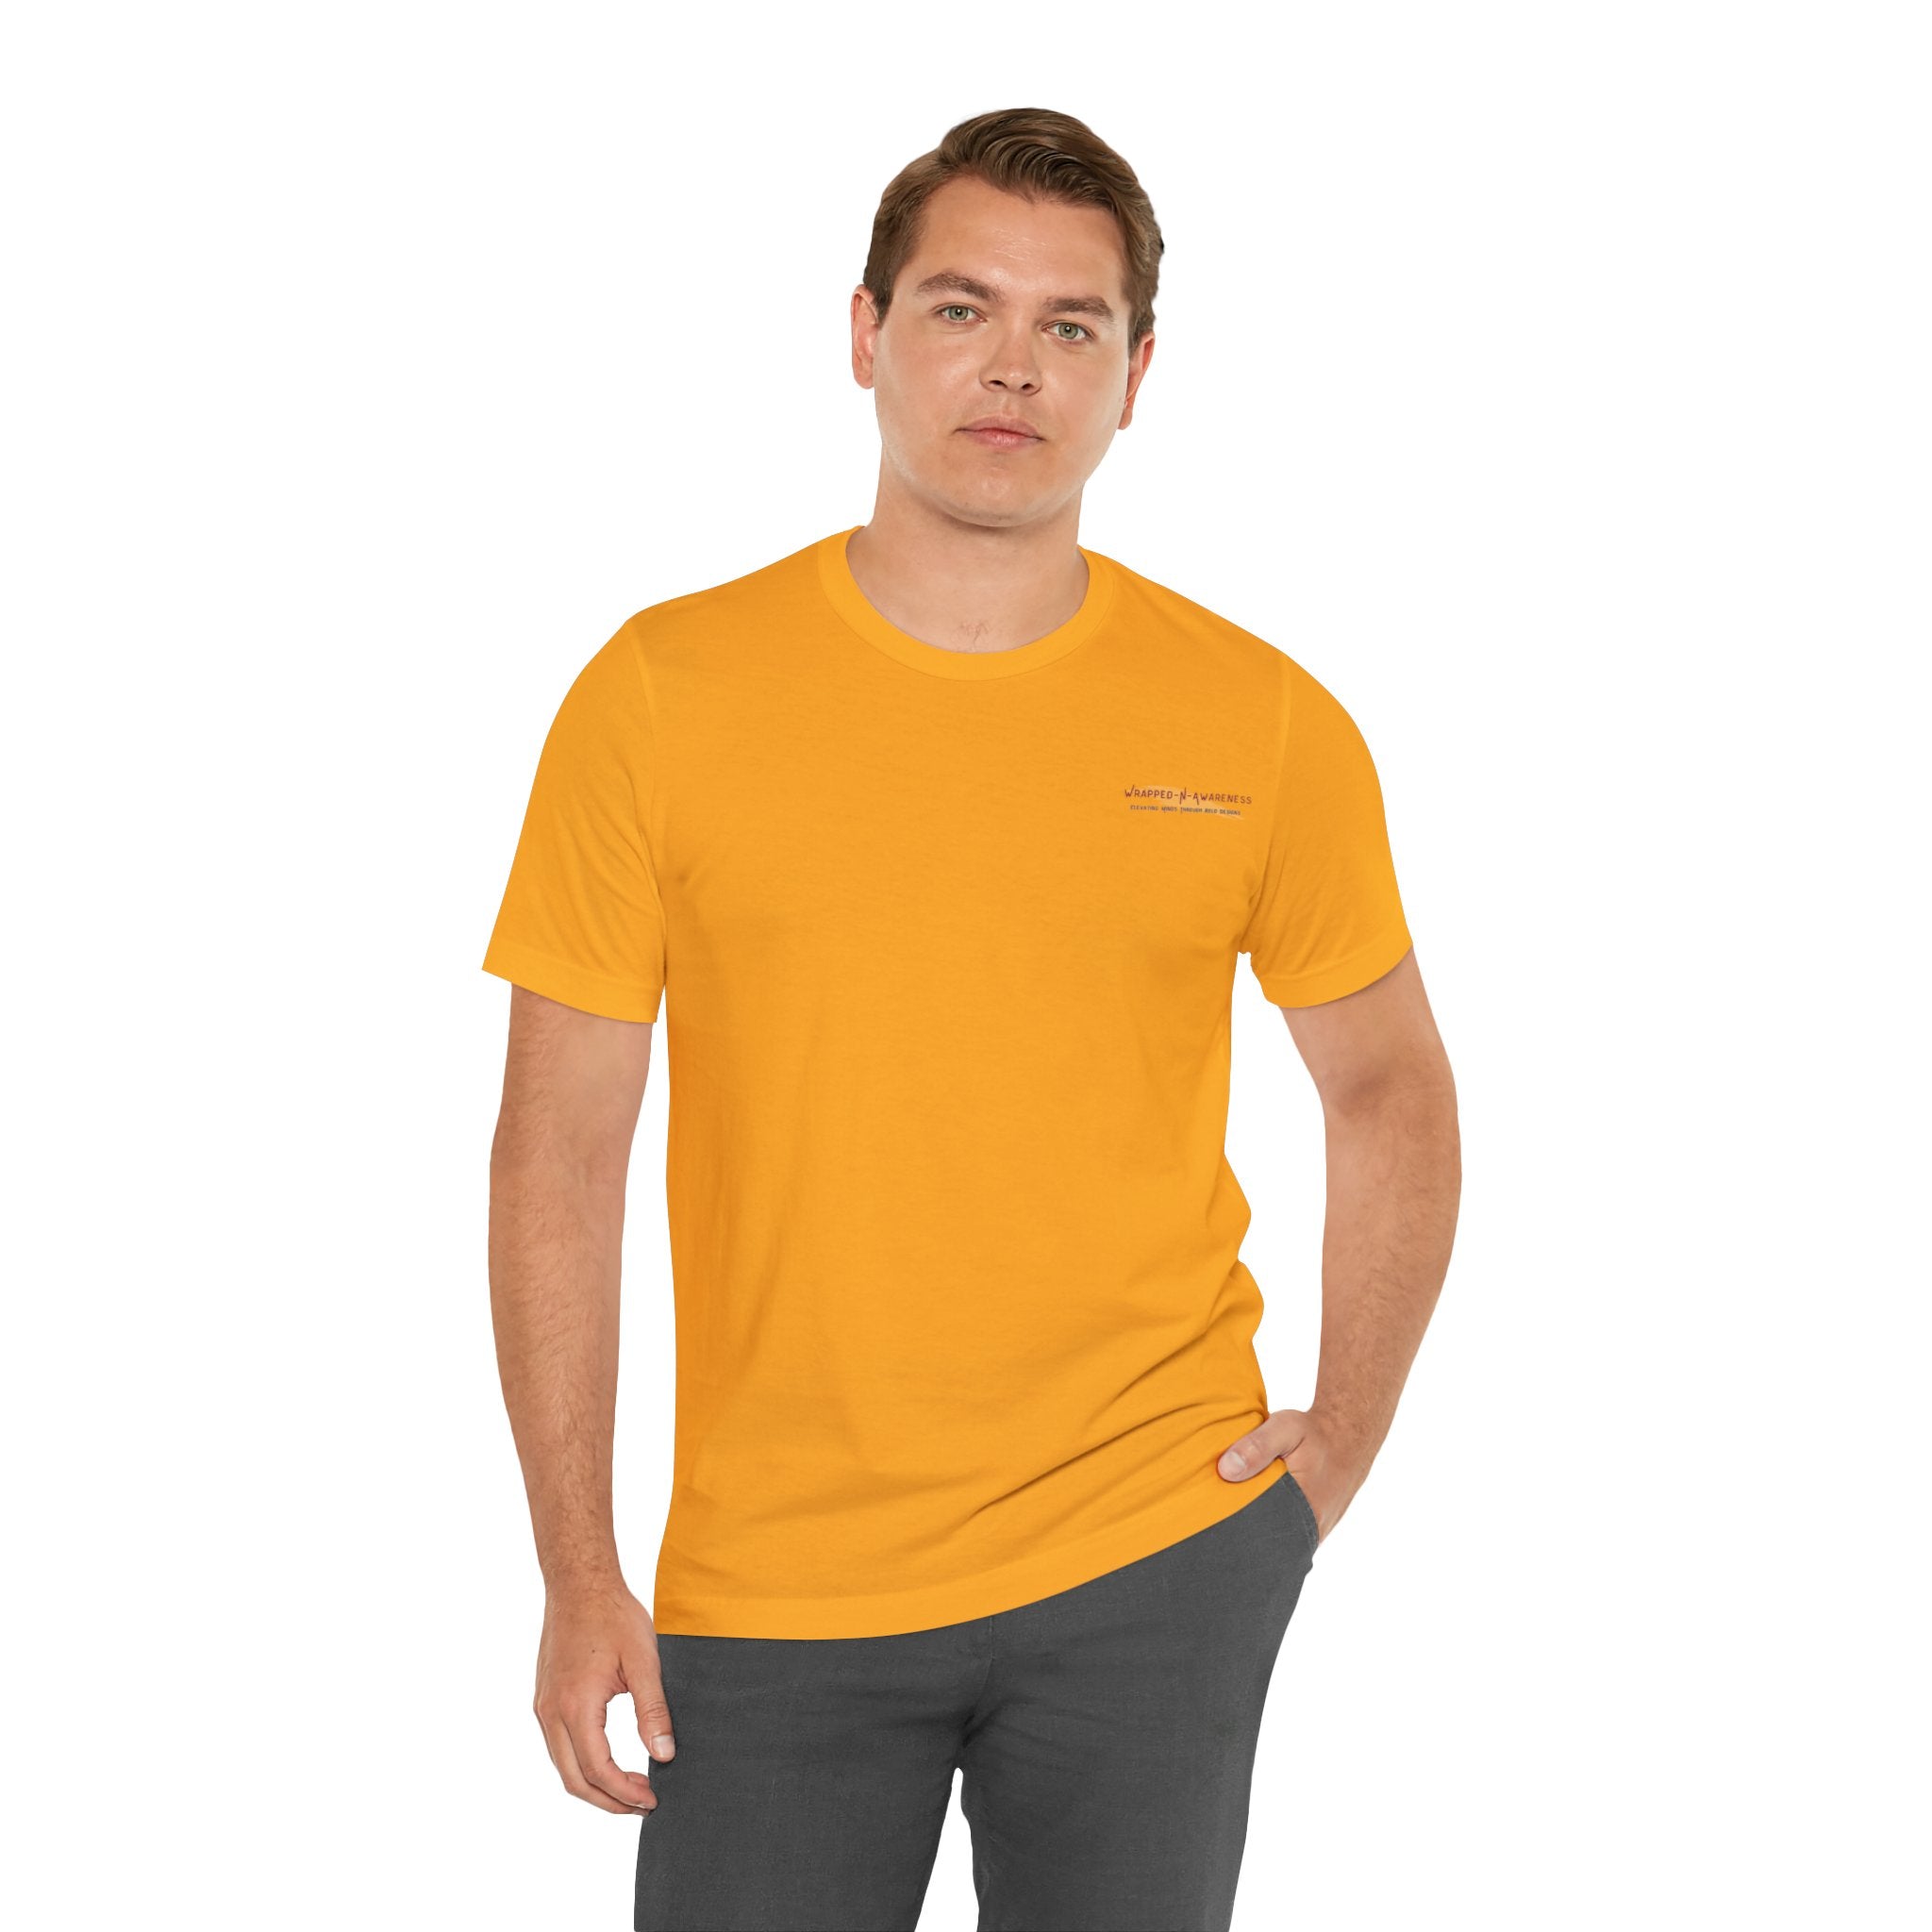 Progress Over Perfection Tee - Bella+Canvas 3001 Yellow Airlume Cotton Bella+Canvas 3001 Crew Neckline Jersey Short Sleeve Lightweight Fabric Mental Health Support Retail Fit Tear-away Label Tee Unisex Tee T-Shirt 1850132084865202857_2048 Printify